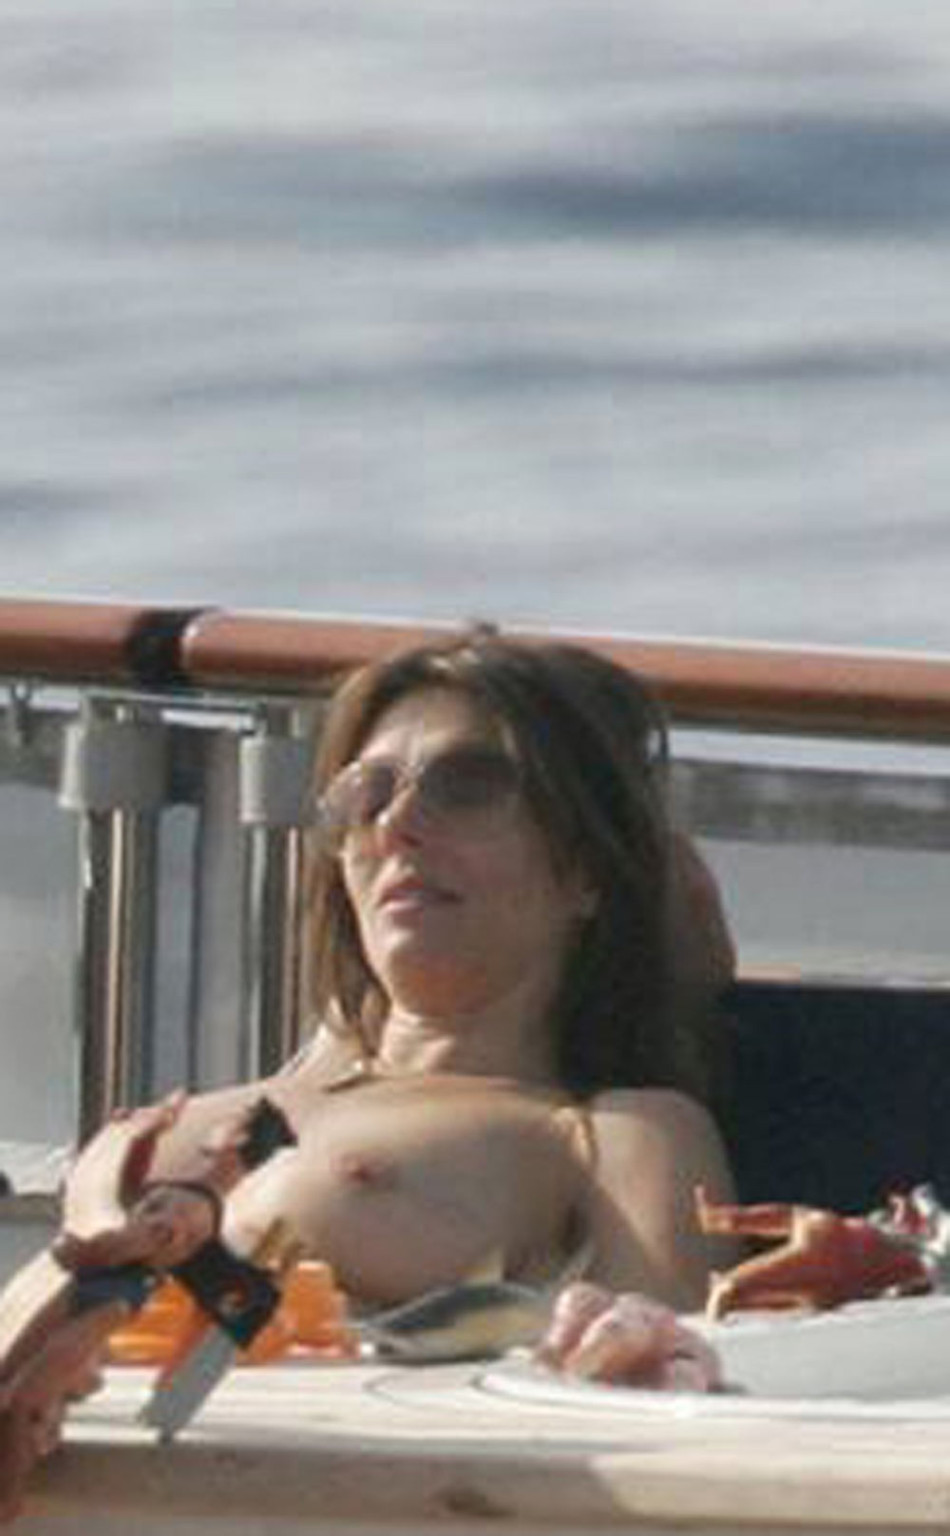 Elizabeth Hurley caught topless on vacation #75278991